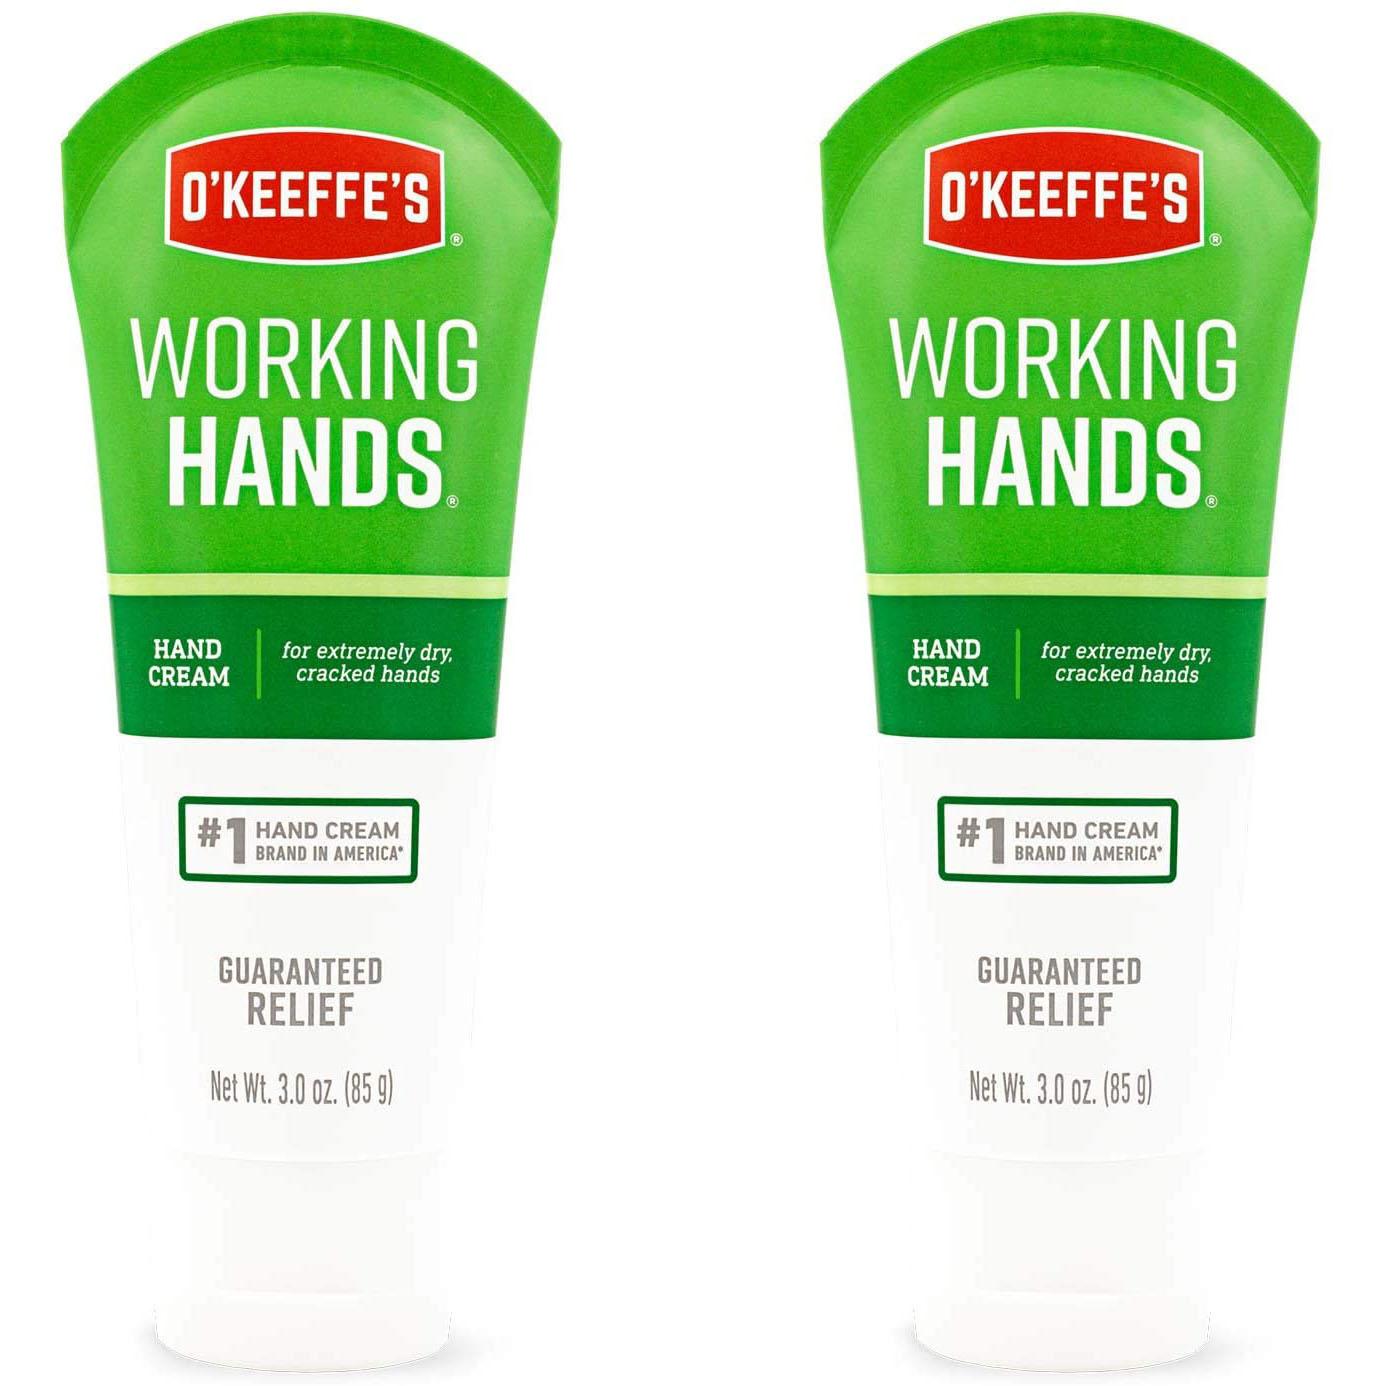 2 Okeeffes Working Hands Hand Cream Tubes for $9.06